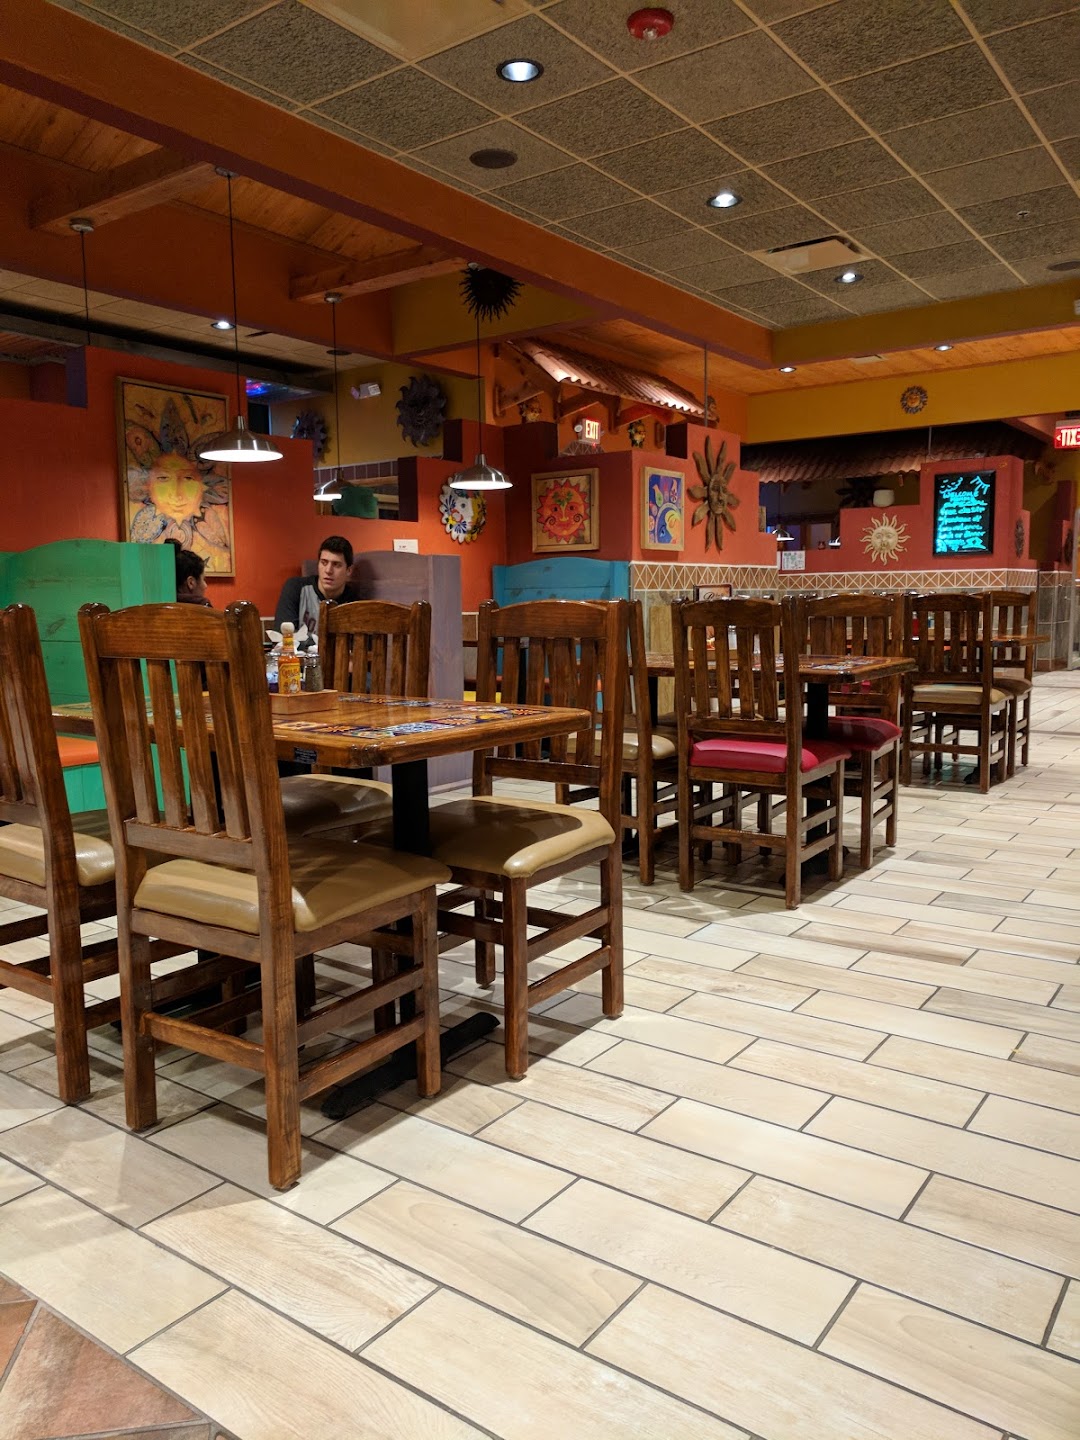 Don Sol Mexican Grill